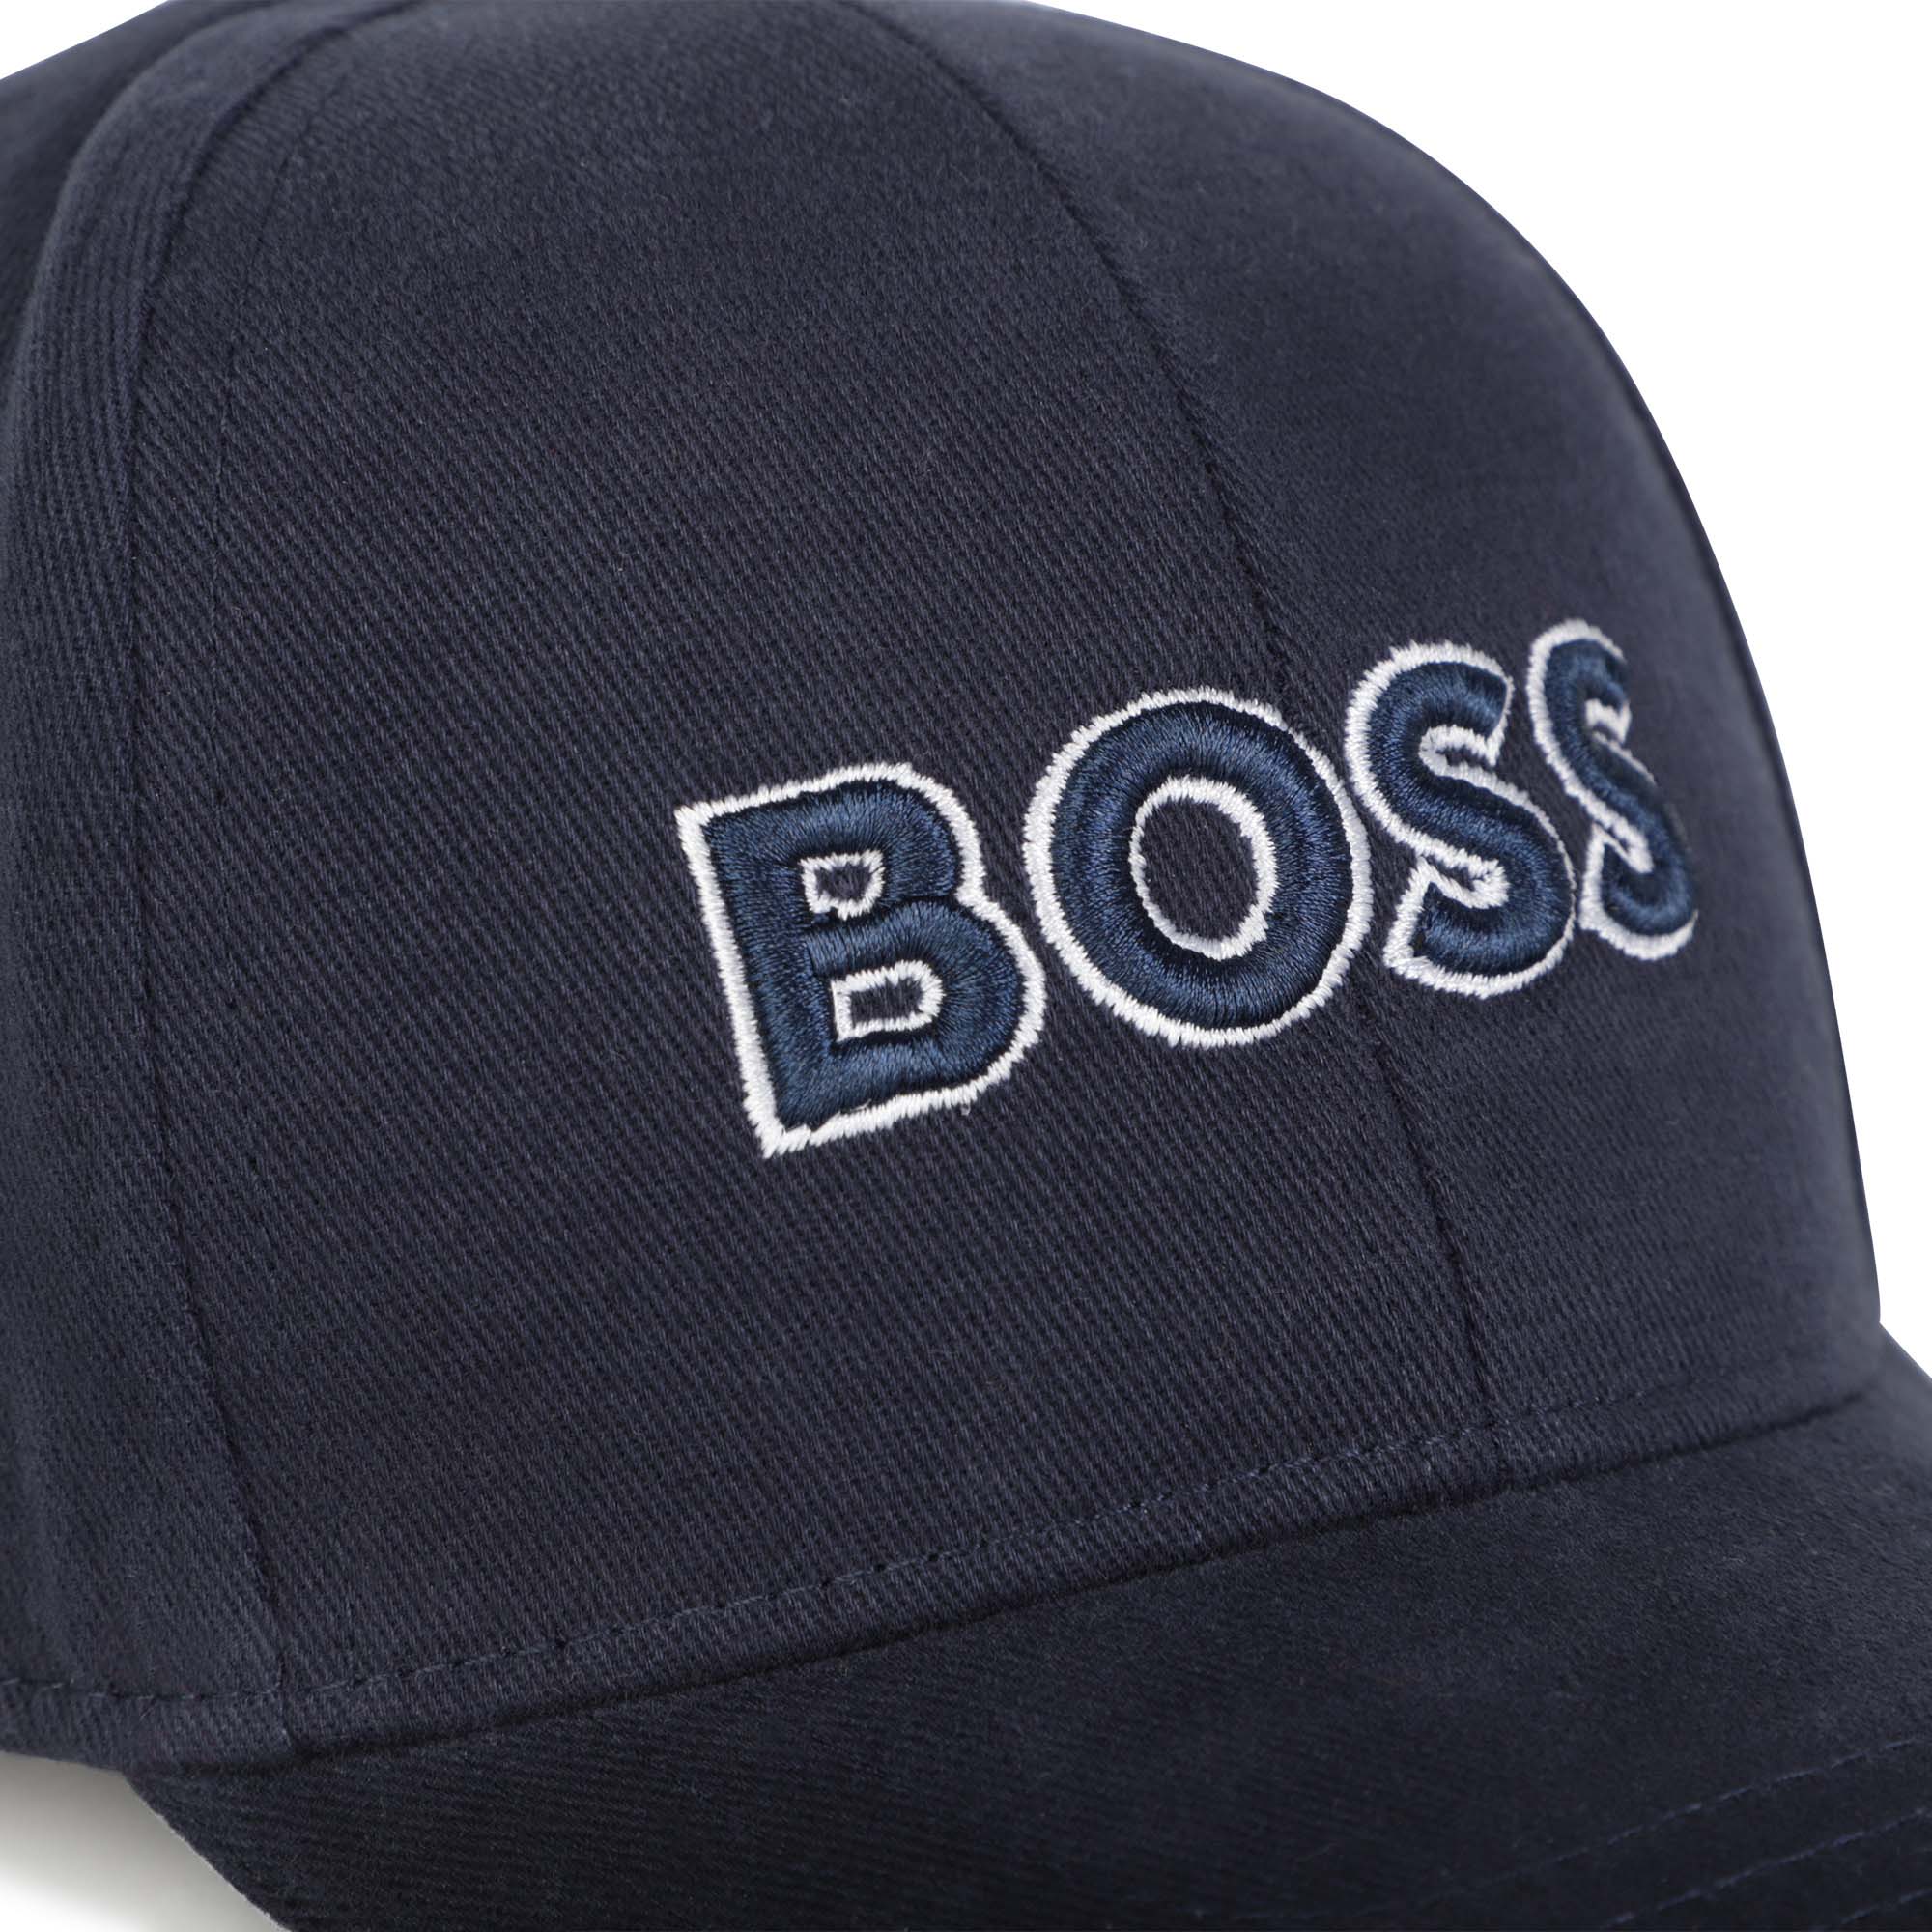 Cap with embroidered logo BOSS for BOY